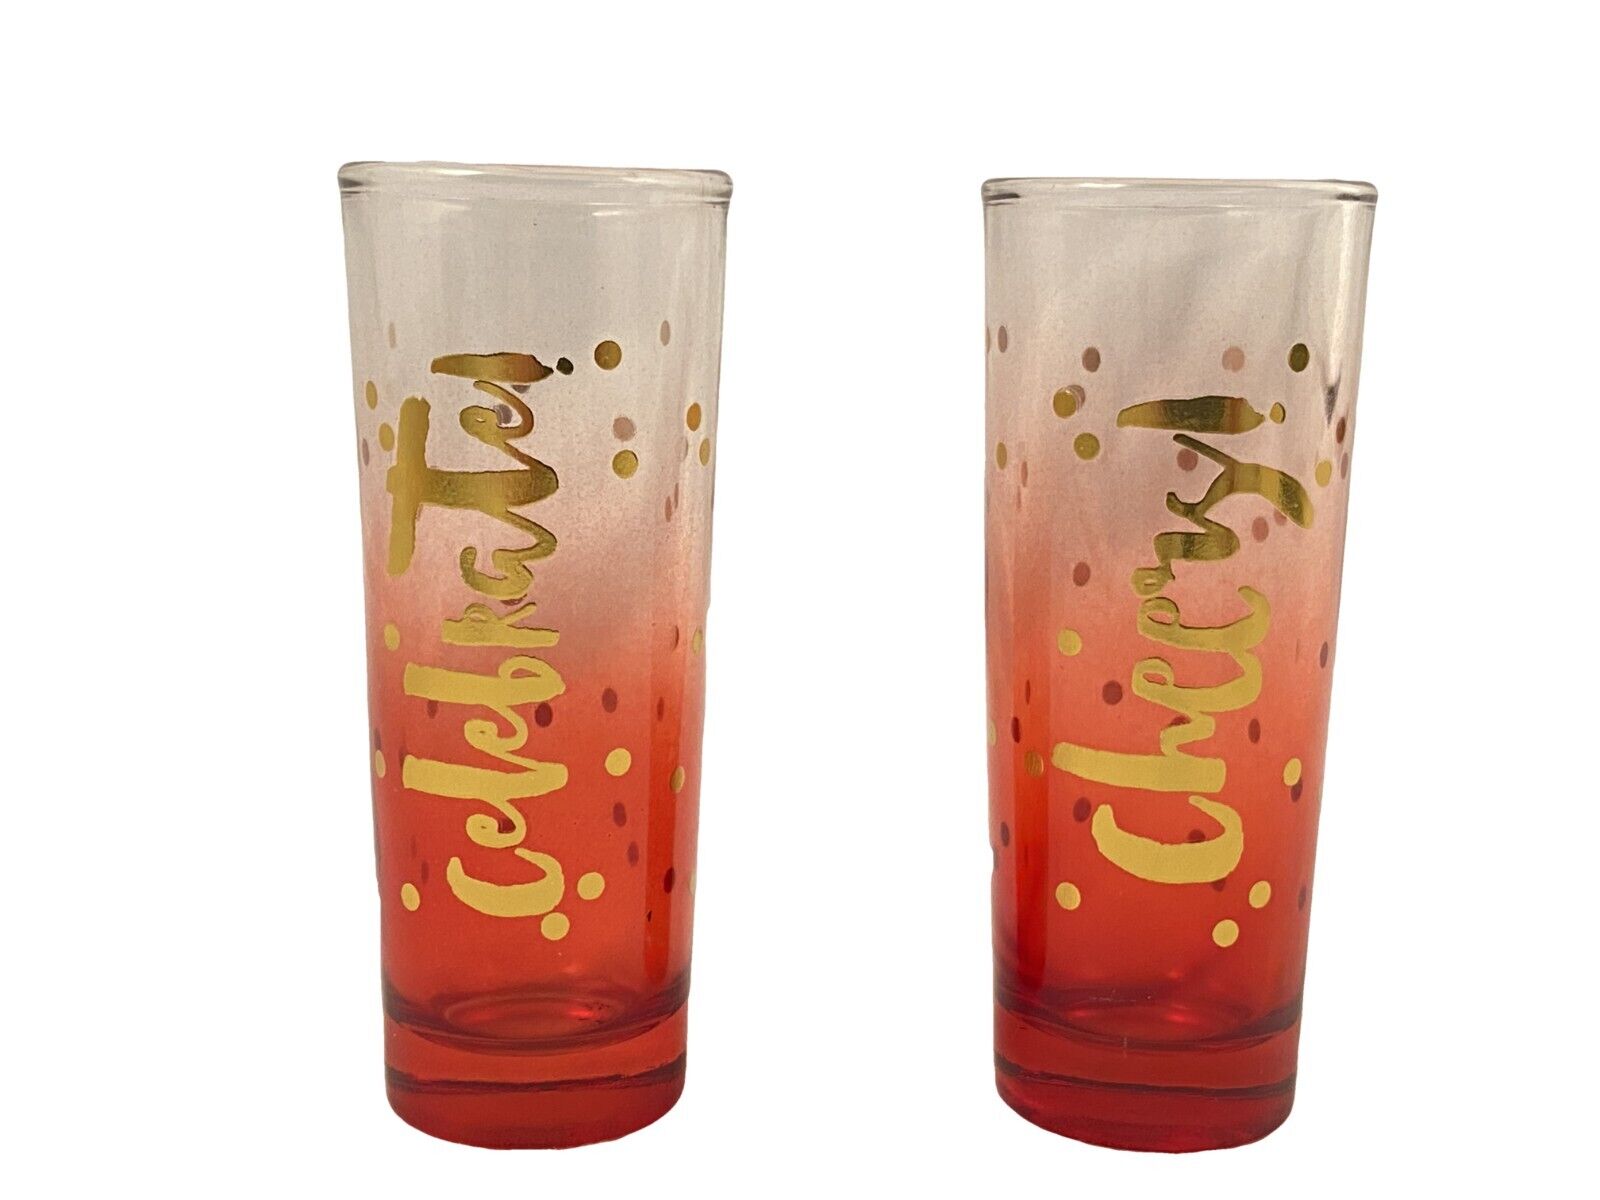 2 Slant Shot Glasses Celebrate Cheers Ombre with Polka Dots 2 Ounce each NEW